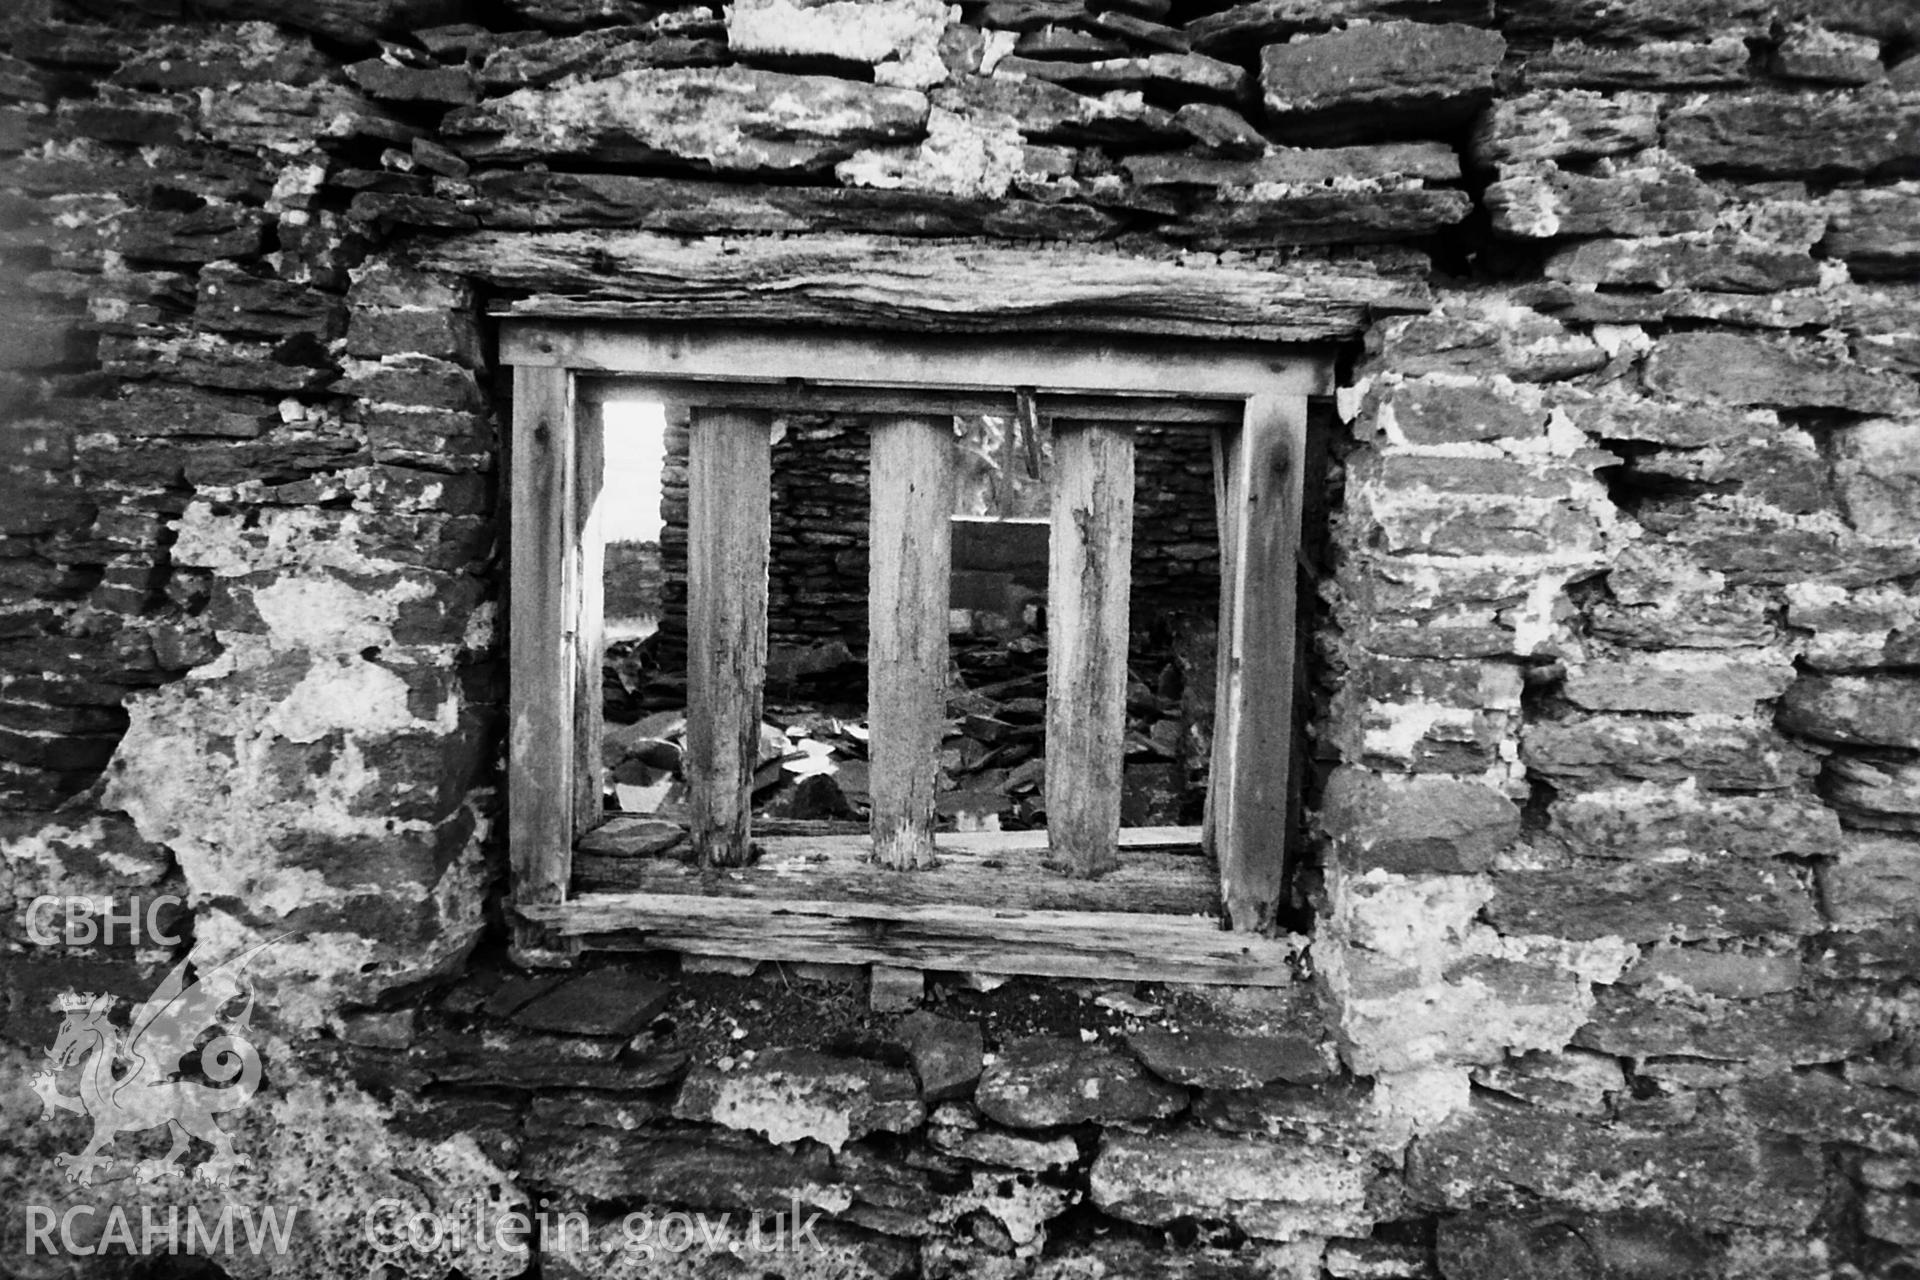 Black and white photo showing hall window at Fforest, taken by Paul R. Davis.